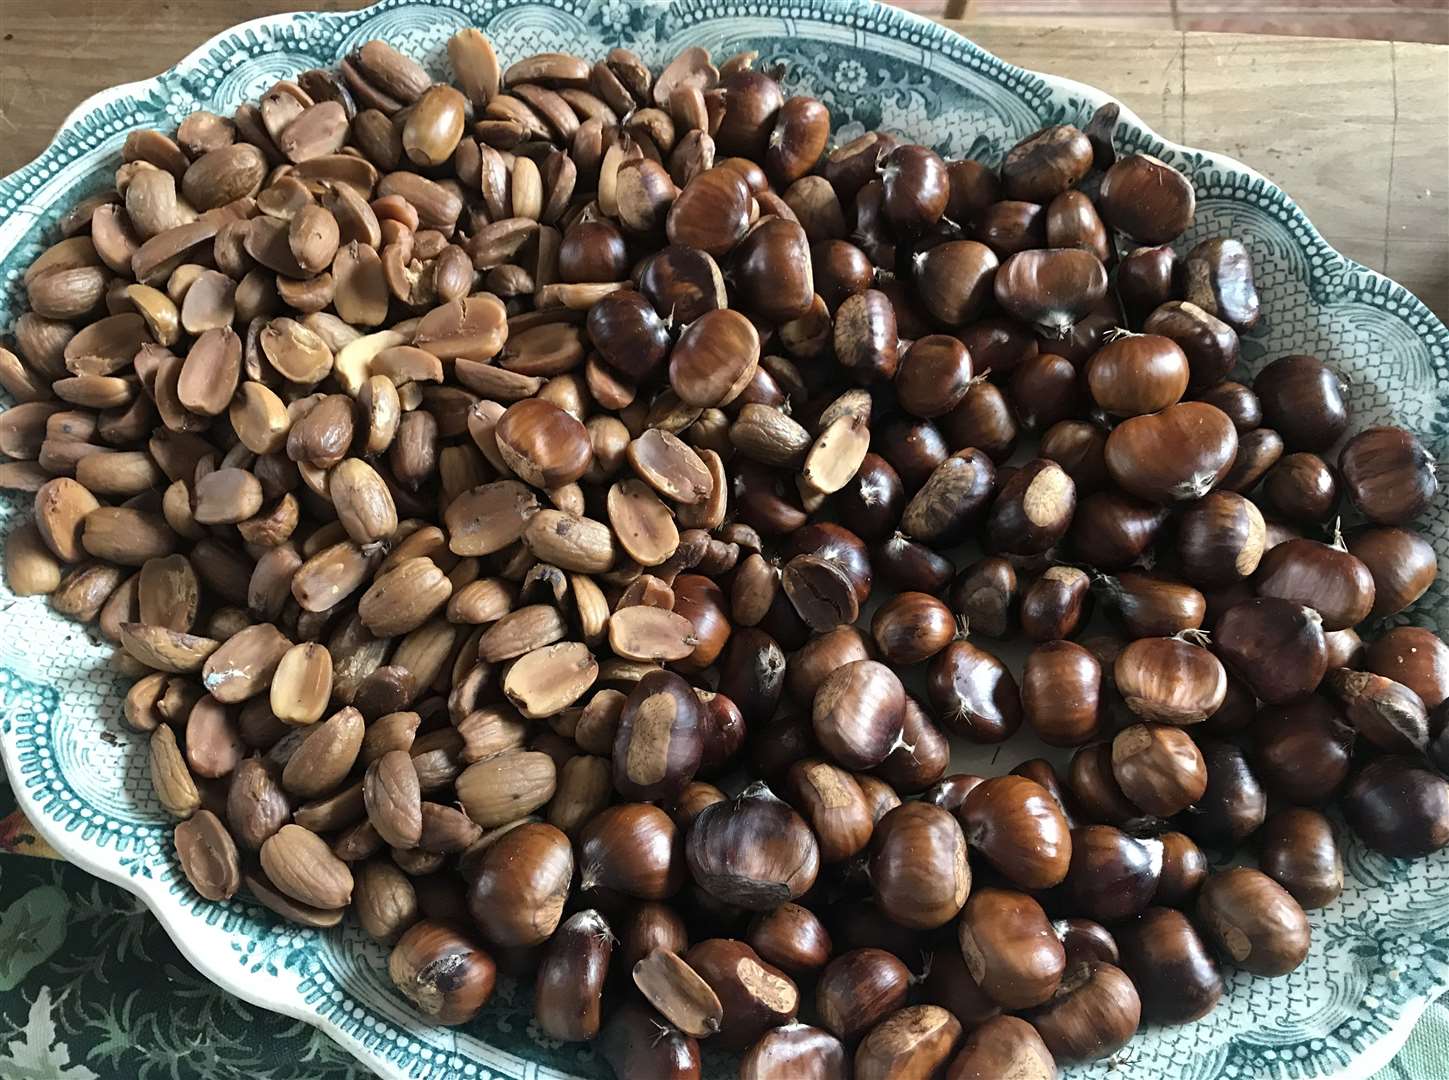 A platter of unpeeled chestnuts and roasted acorns could be found in Miles' kitchen